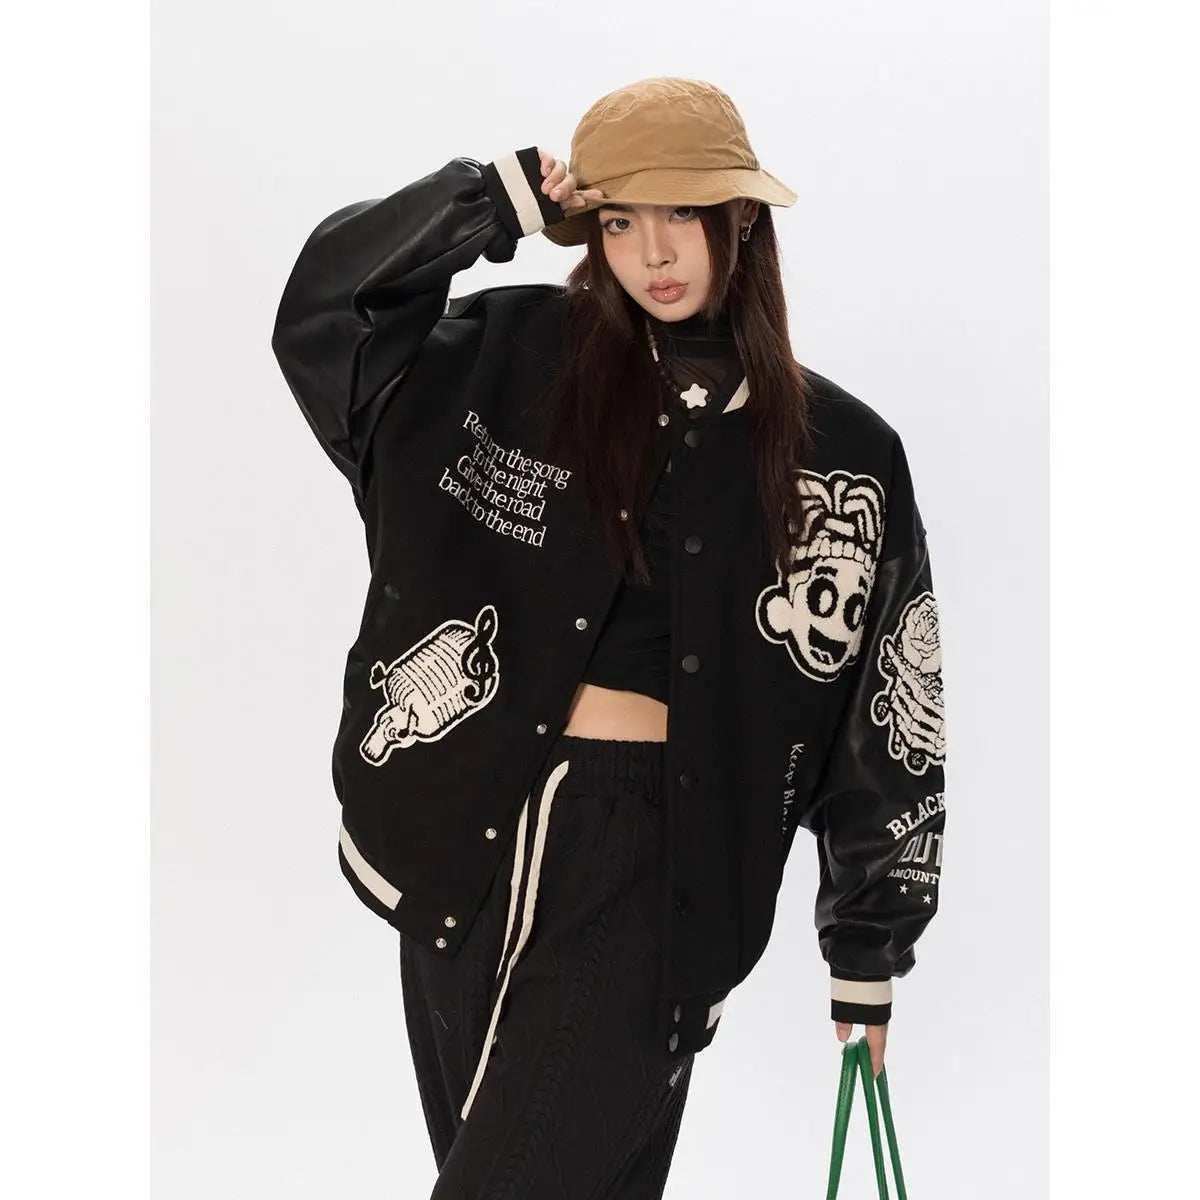 American character avatar pattern towel embroidery stitching trendy jackets for women  street hip hop fashion versatile y2k